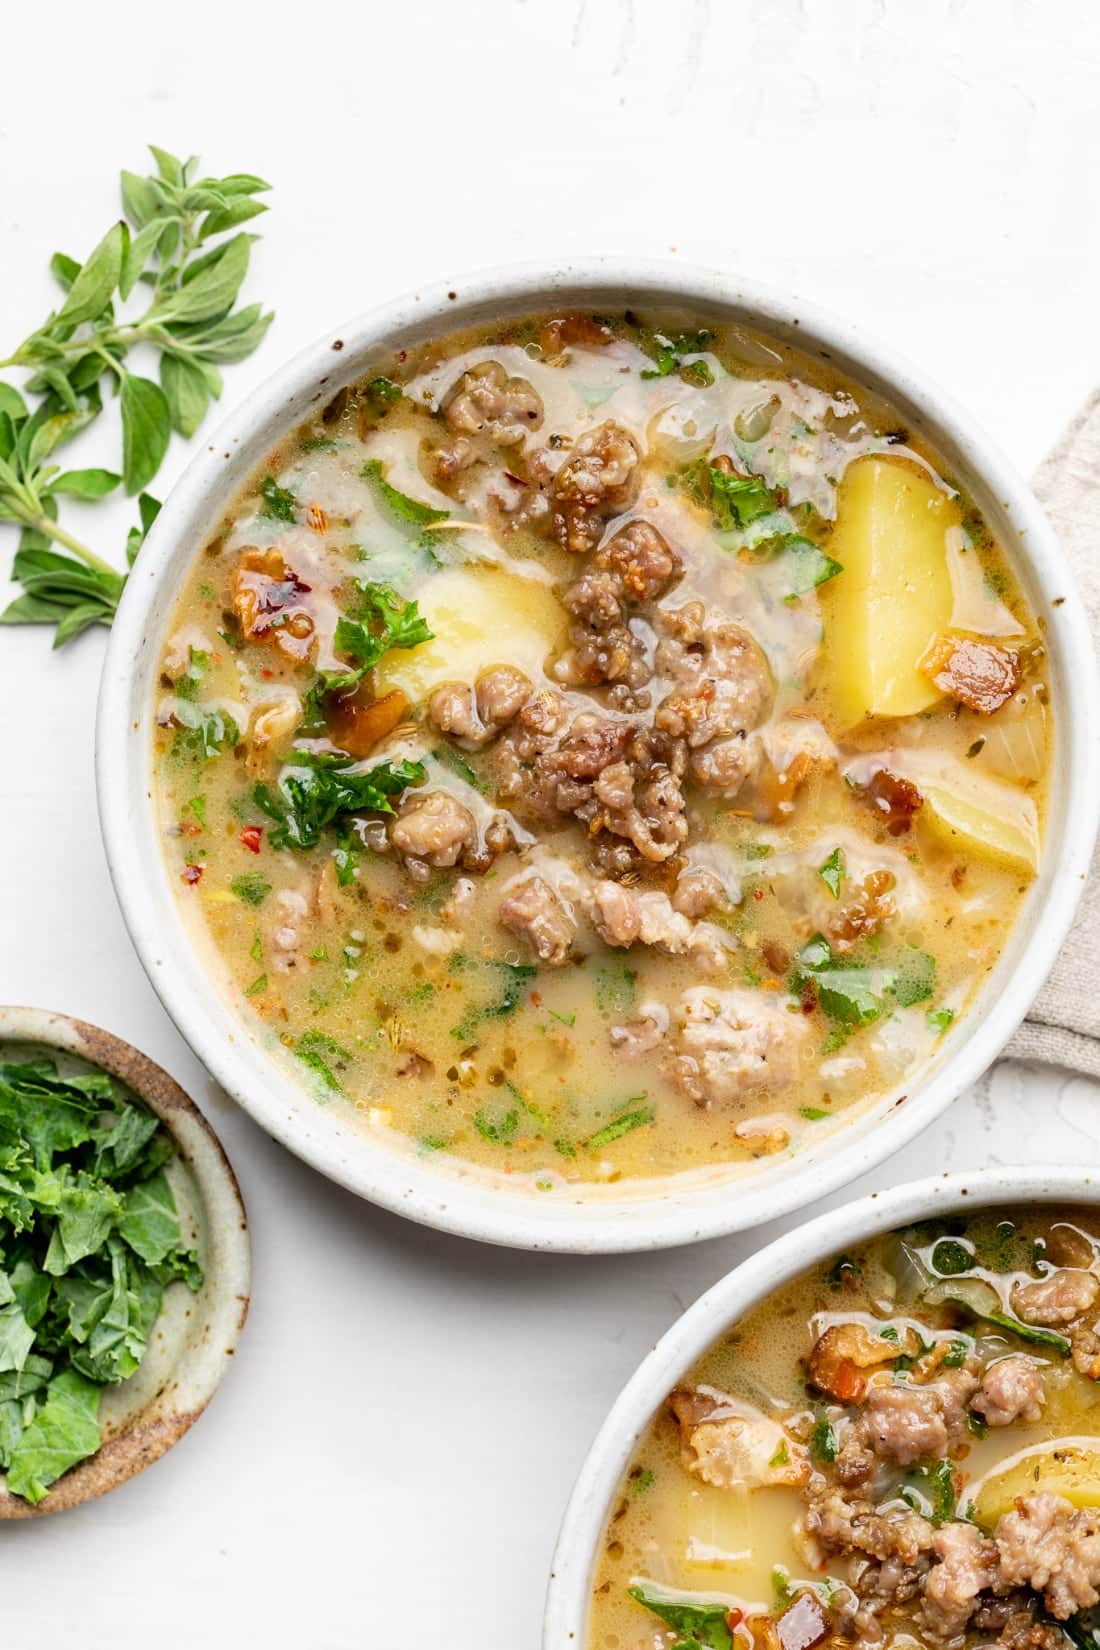 Two bowls of zuppa toscana soup with homemade broth, sausage, and kale in bowls around it.